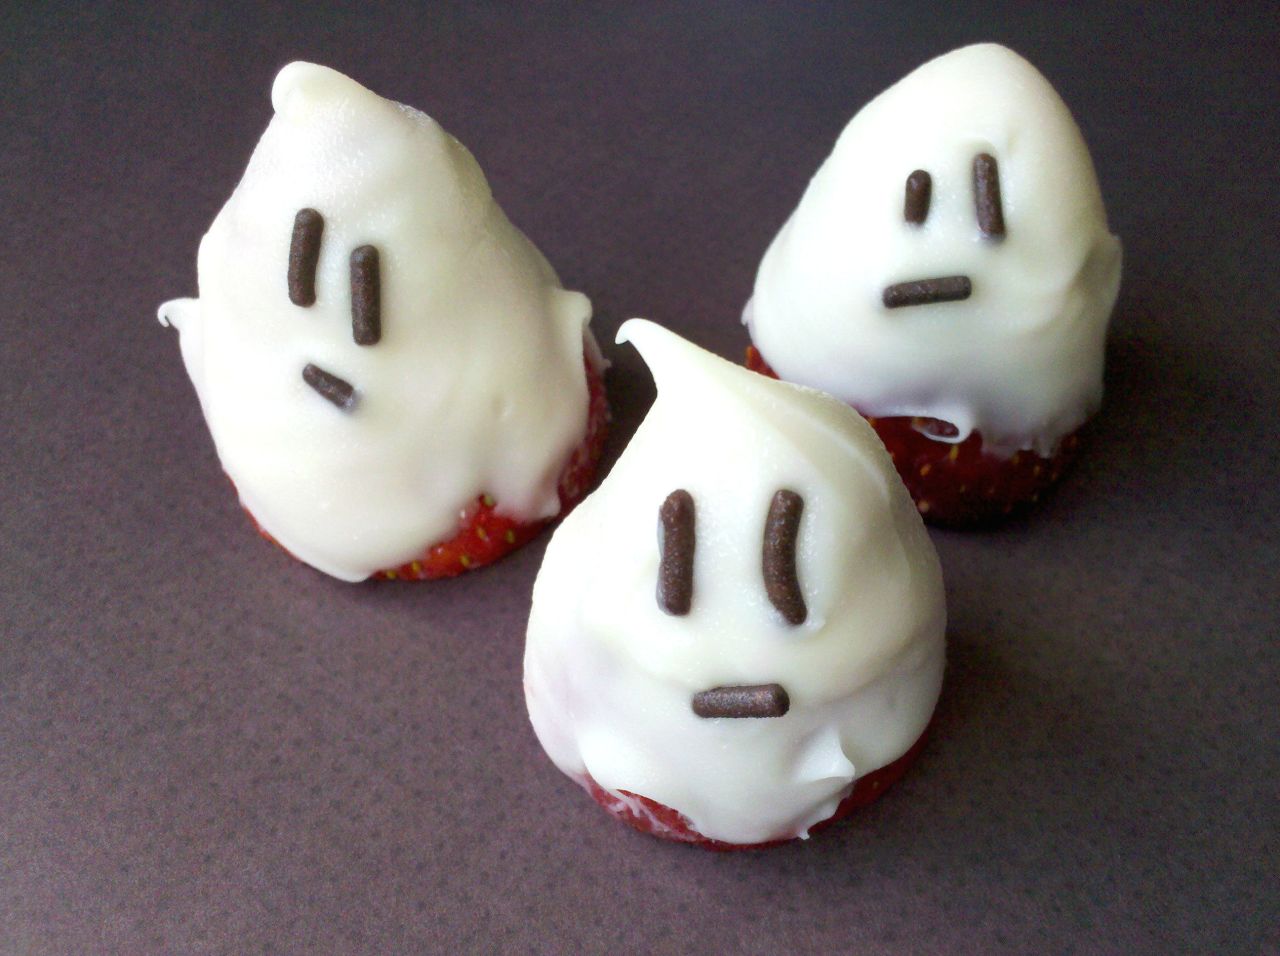 Spooky strawberries are scary easy to make and eat.